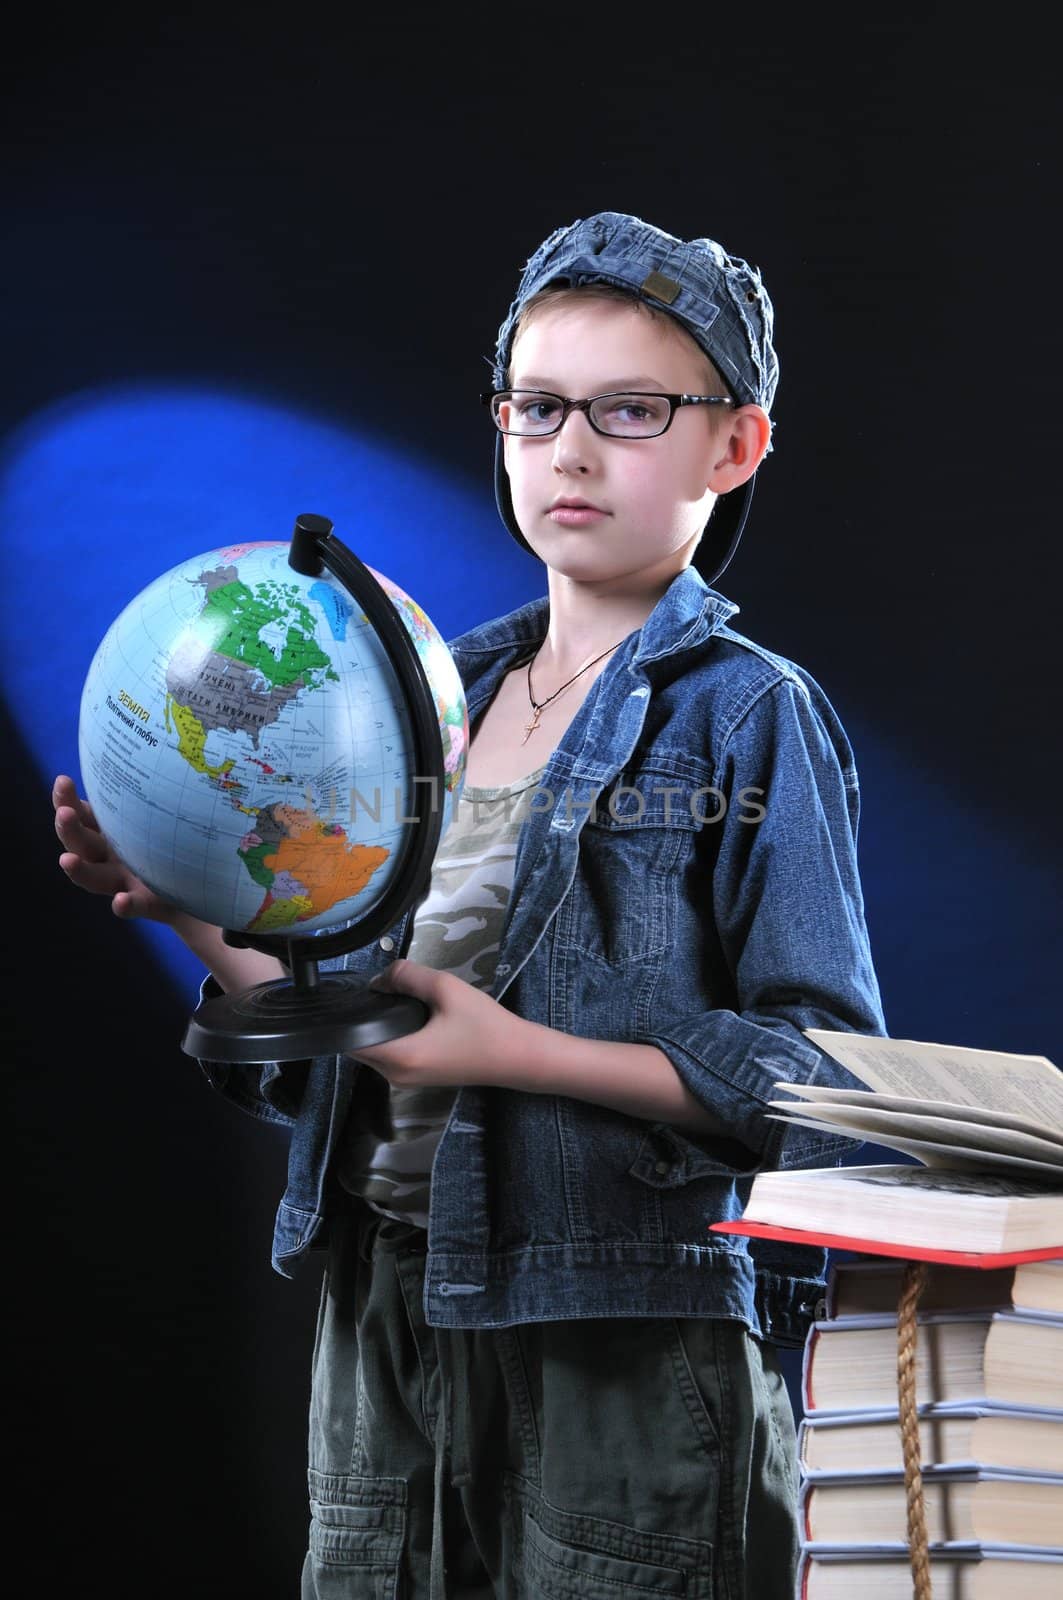 The boy of ten years in glasses gets on the hip student's globe. Low key